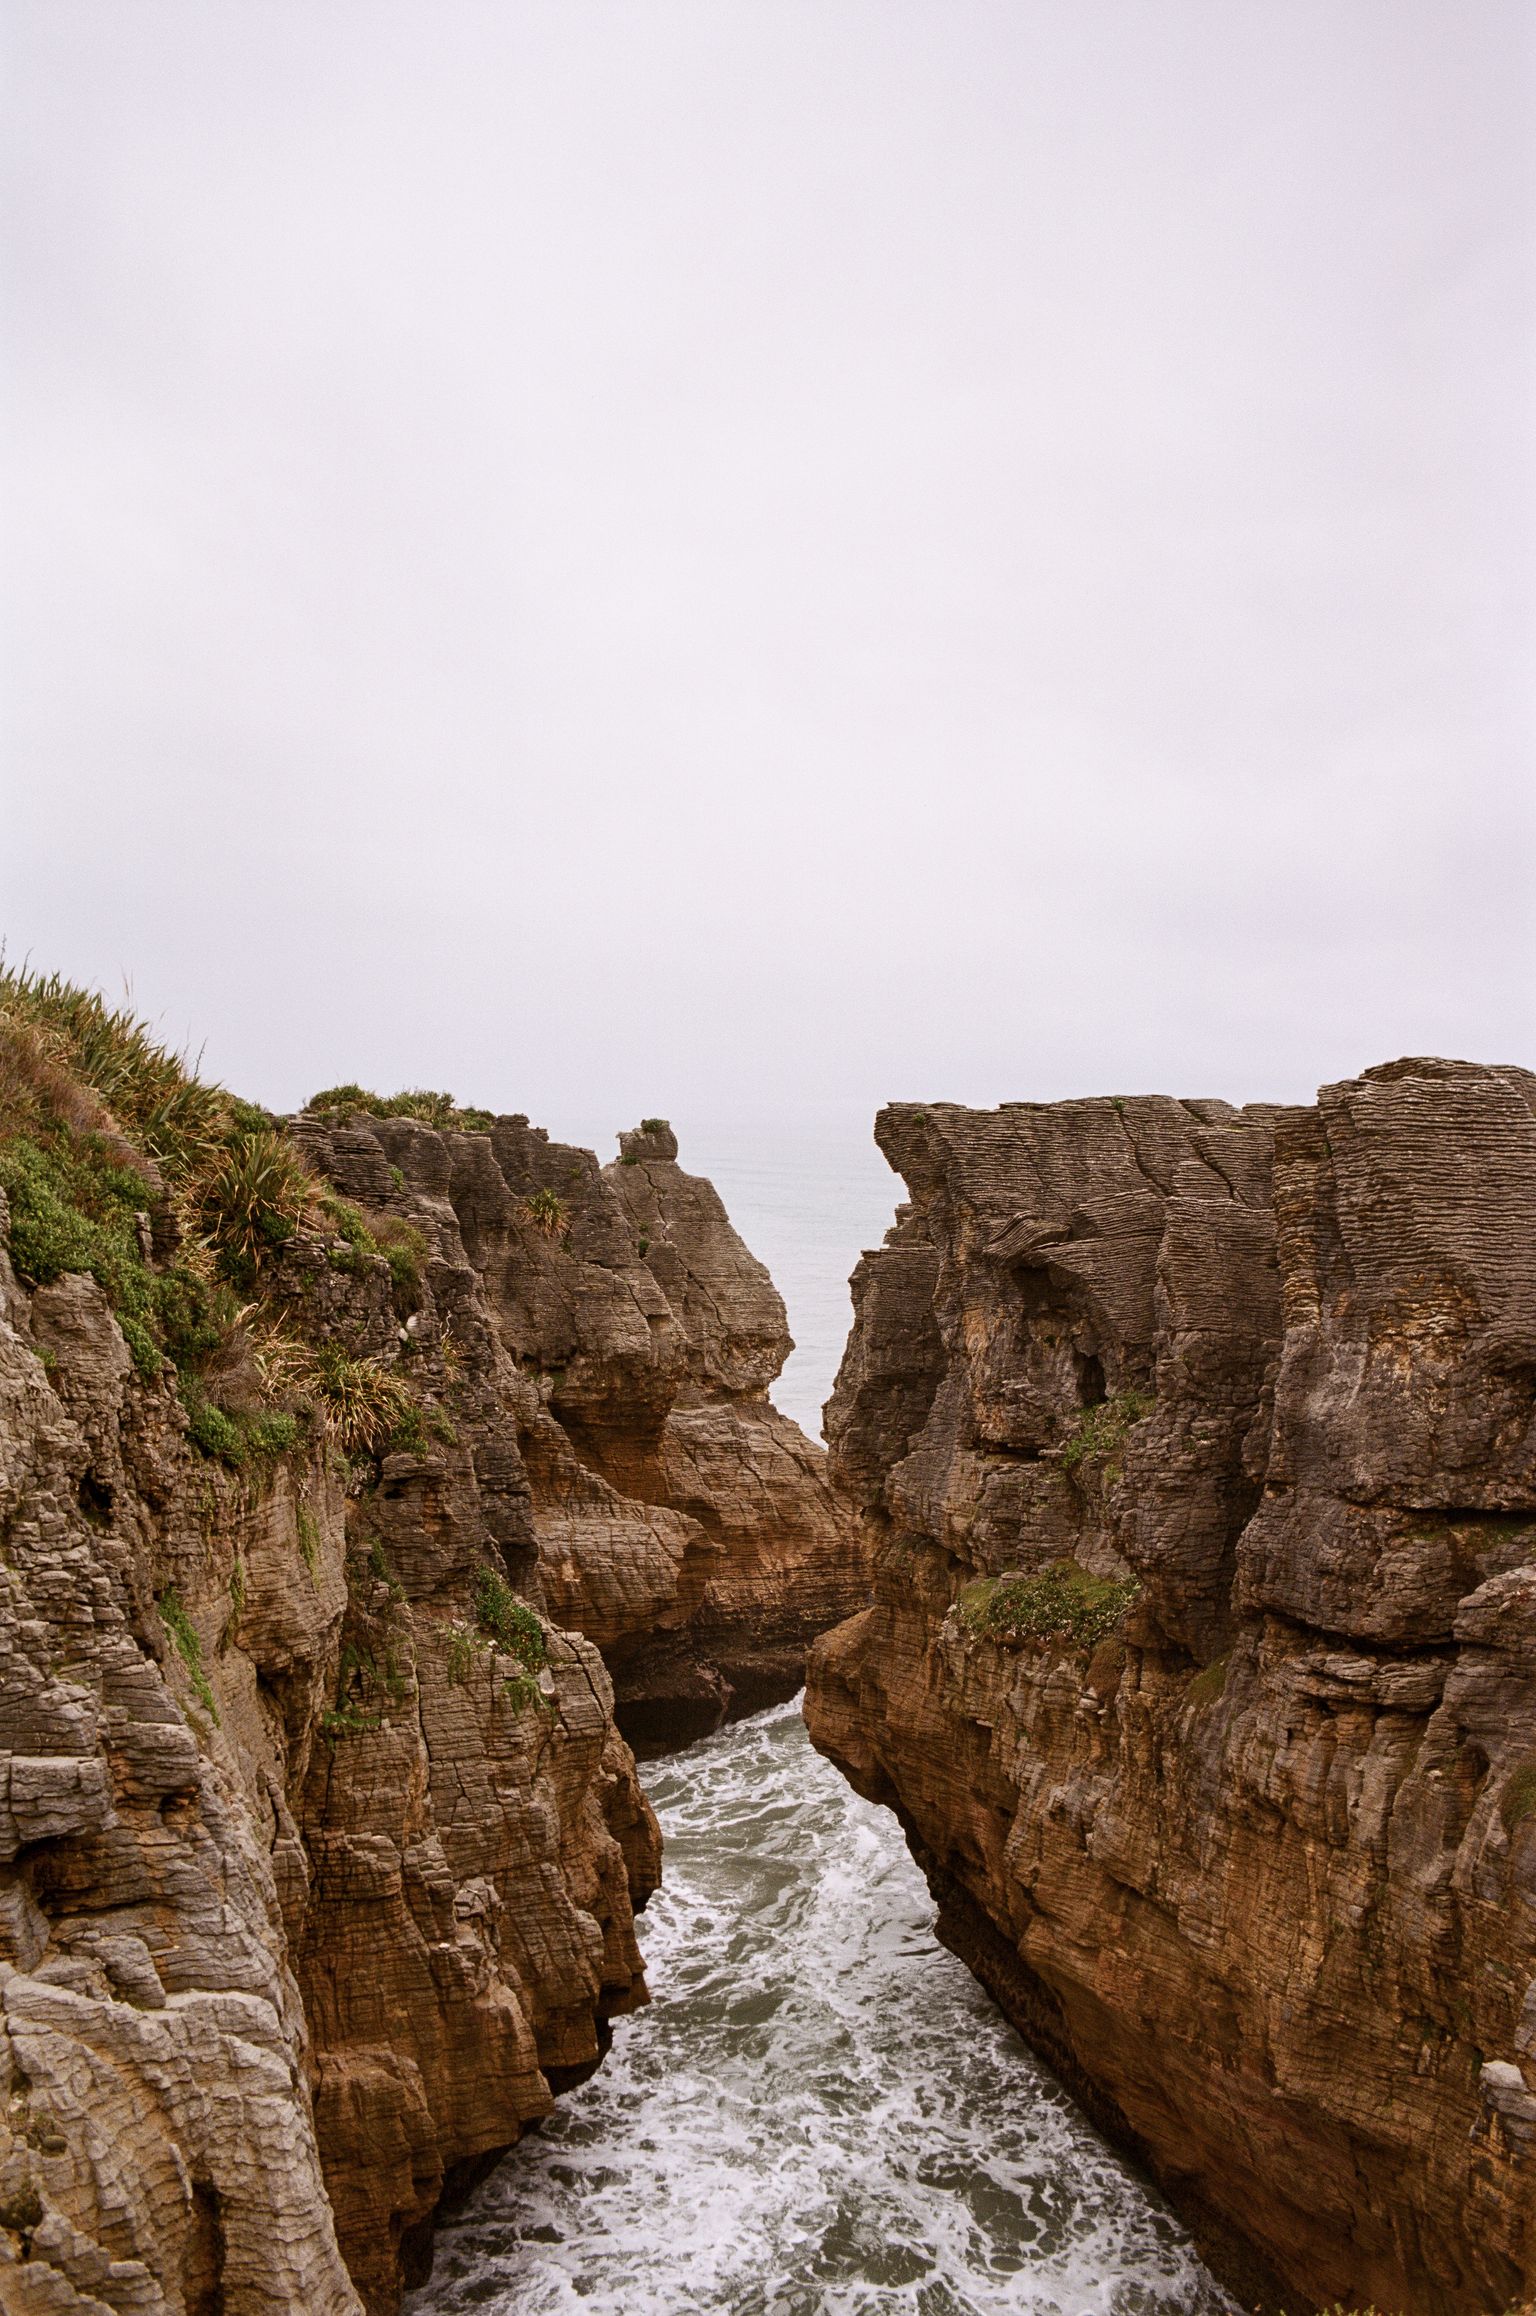 Distinctively layered rock formations jut out of the ocean and form a small canyon. The sky is hazy and overcast; the water fades white into the horizon.